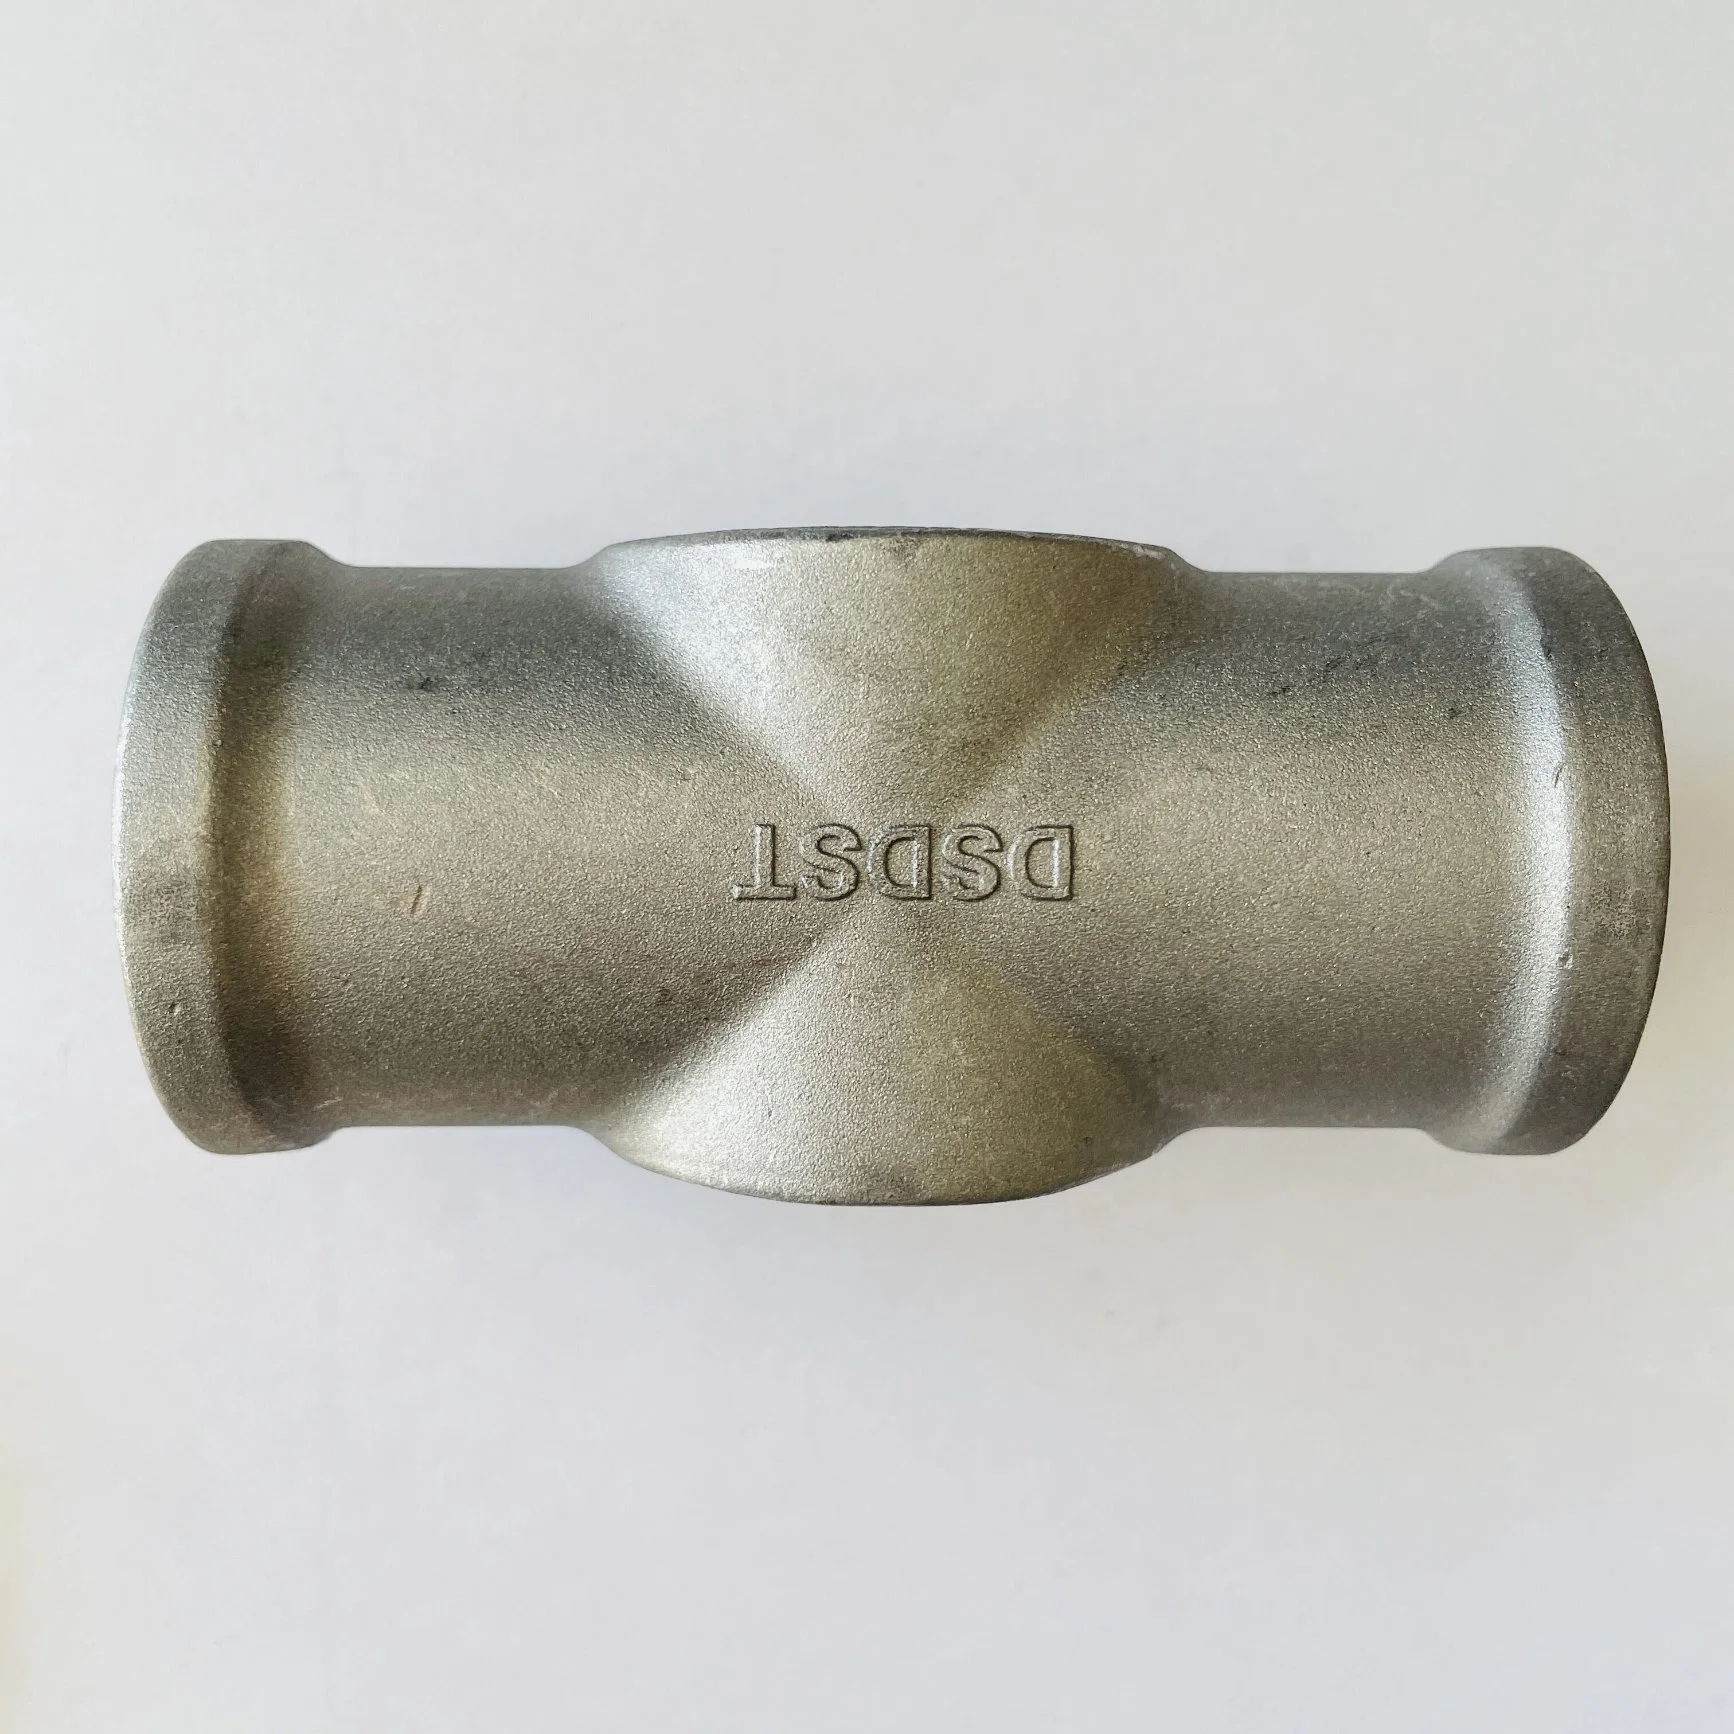 Aluminum Alloy Pipe Fittings Long Tee/Cross for Home Improvement